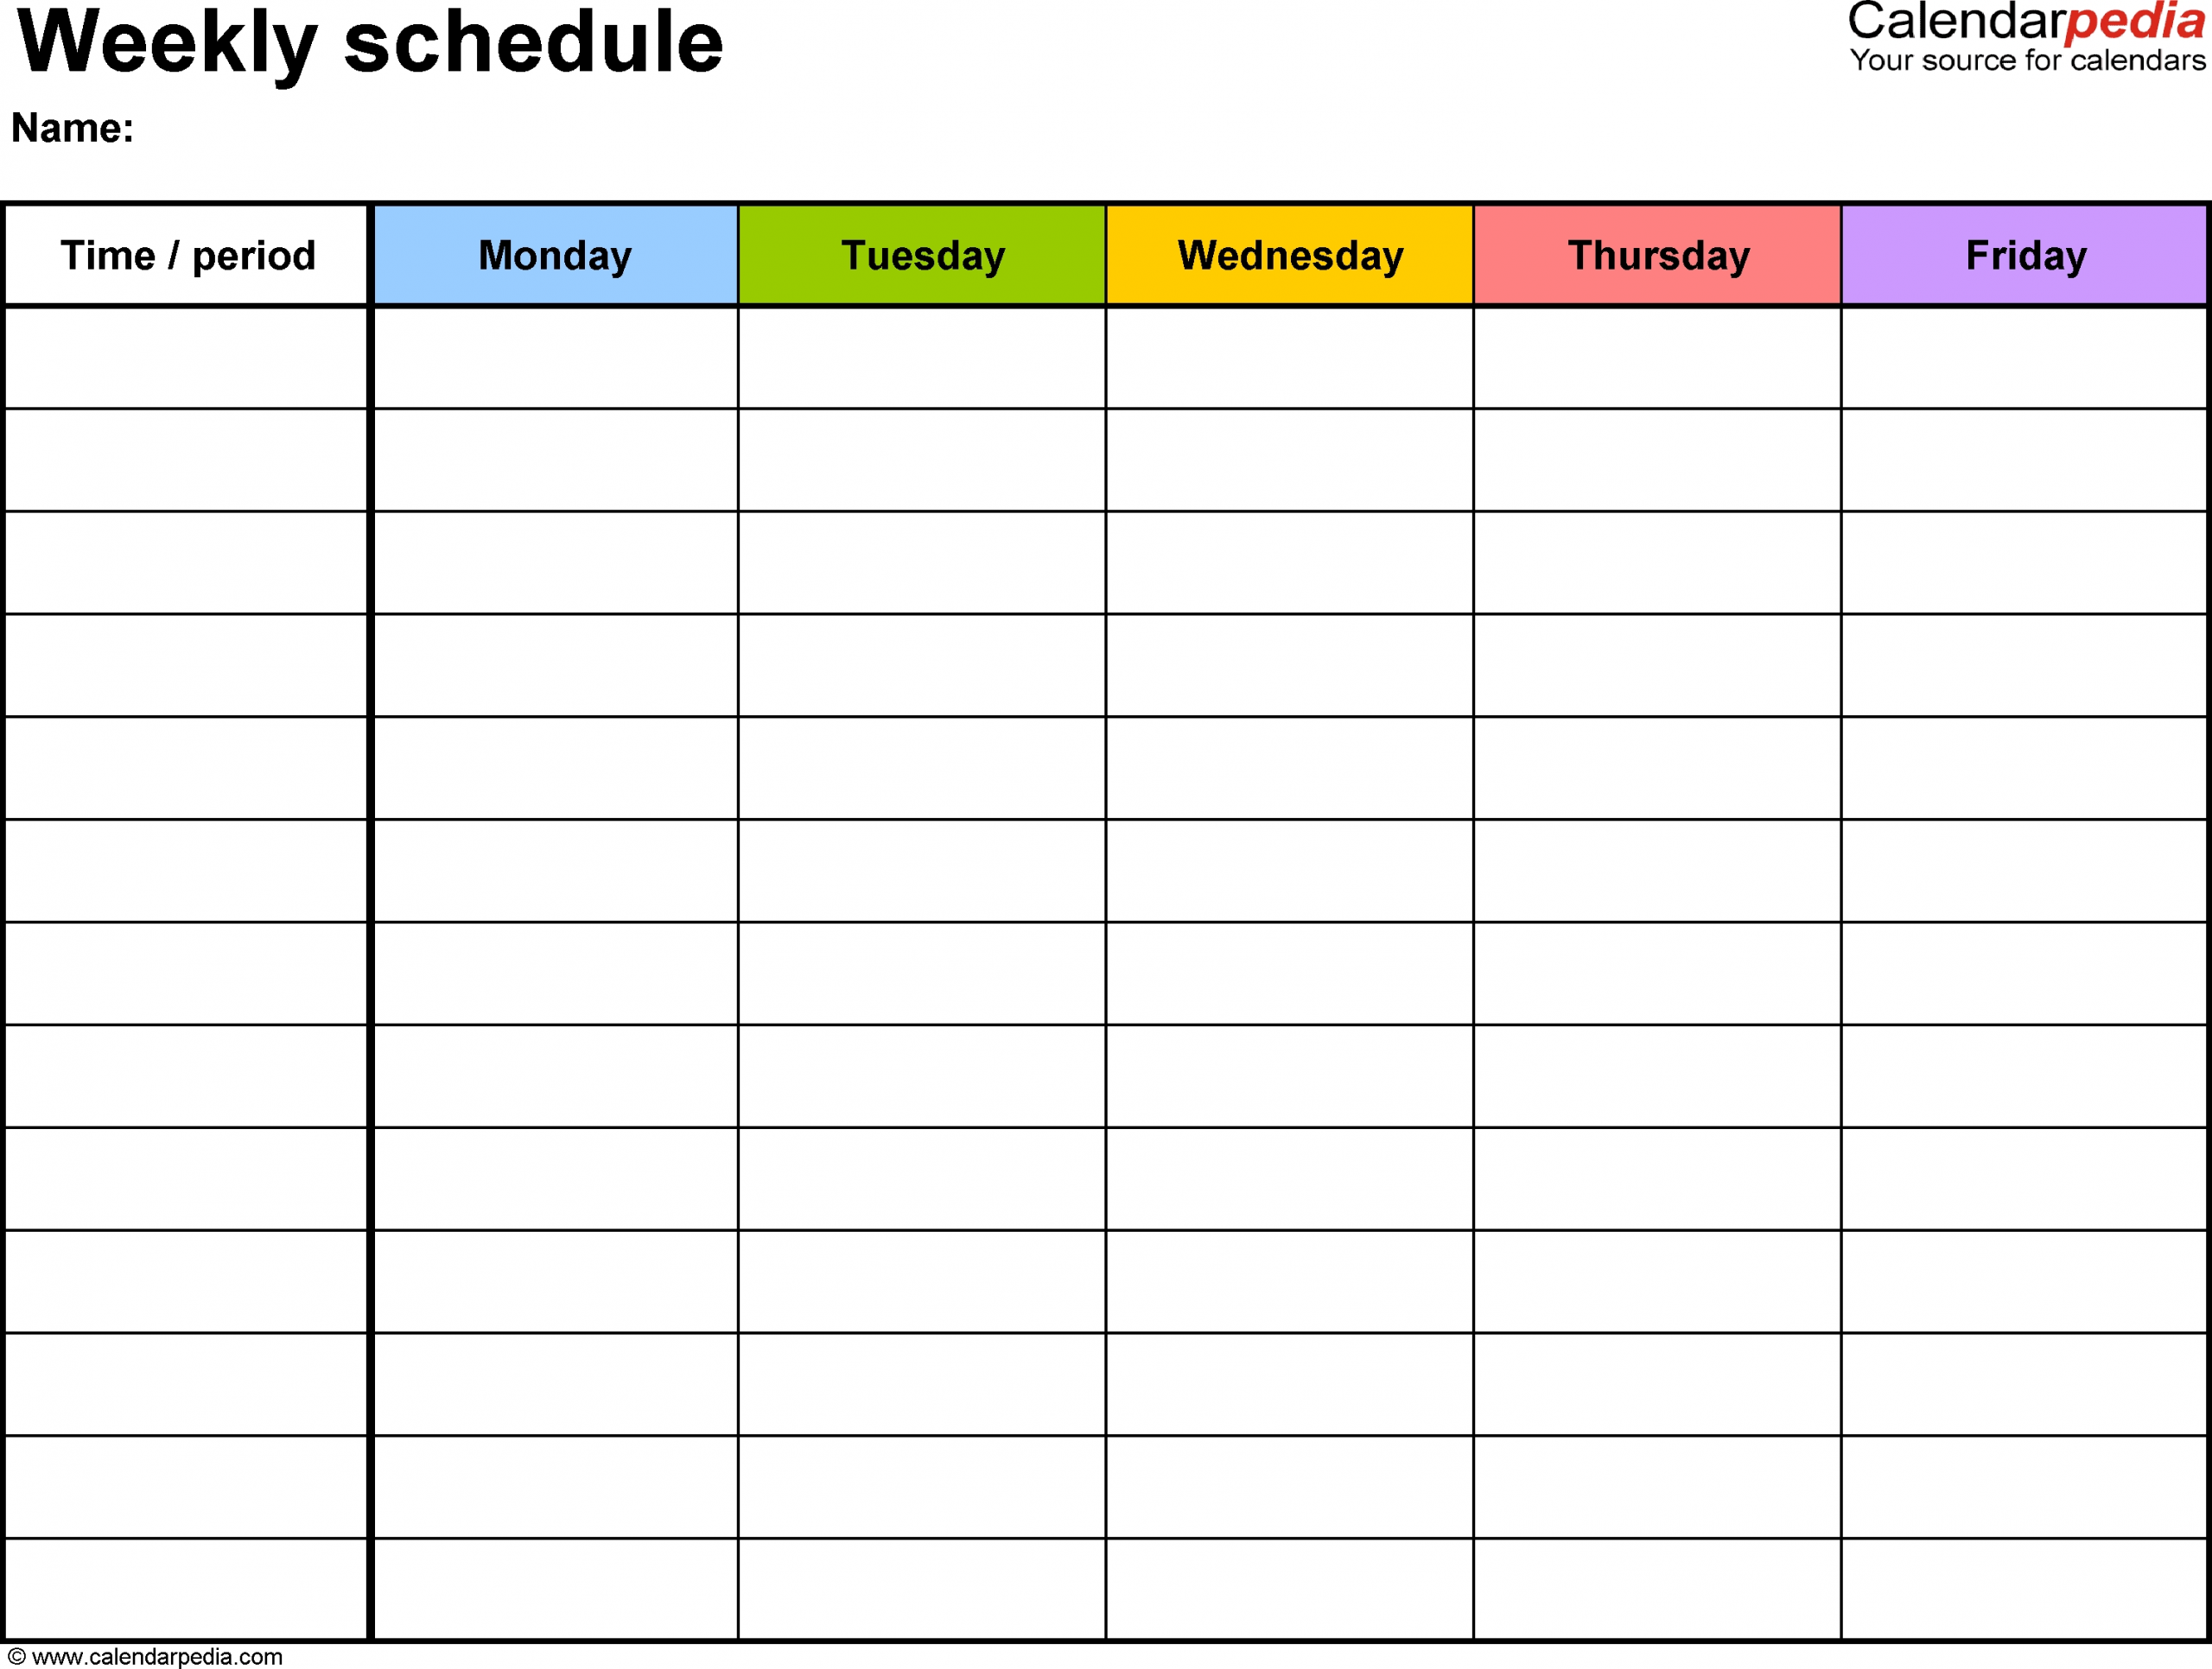 Free Weekly Schedule Templates For Word - 18 Templates intended for Free Blank Printable Weekly Calendar Template